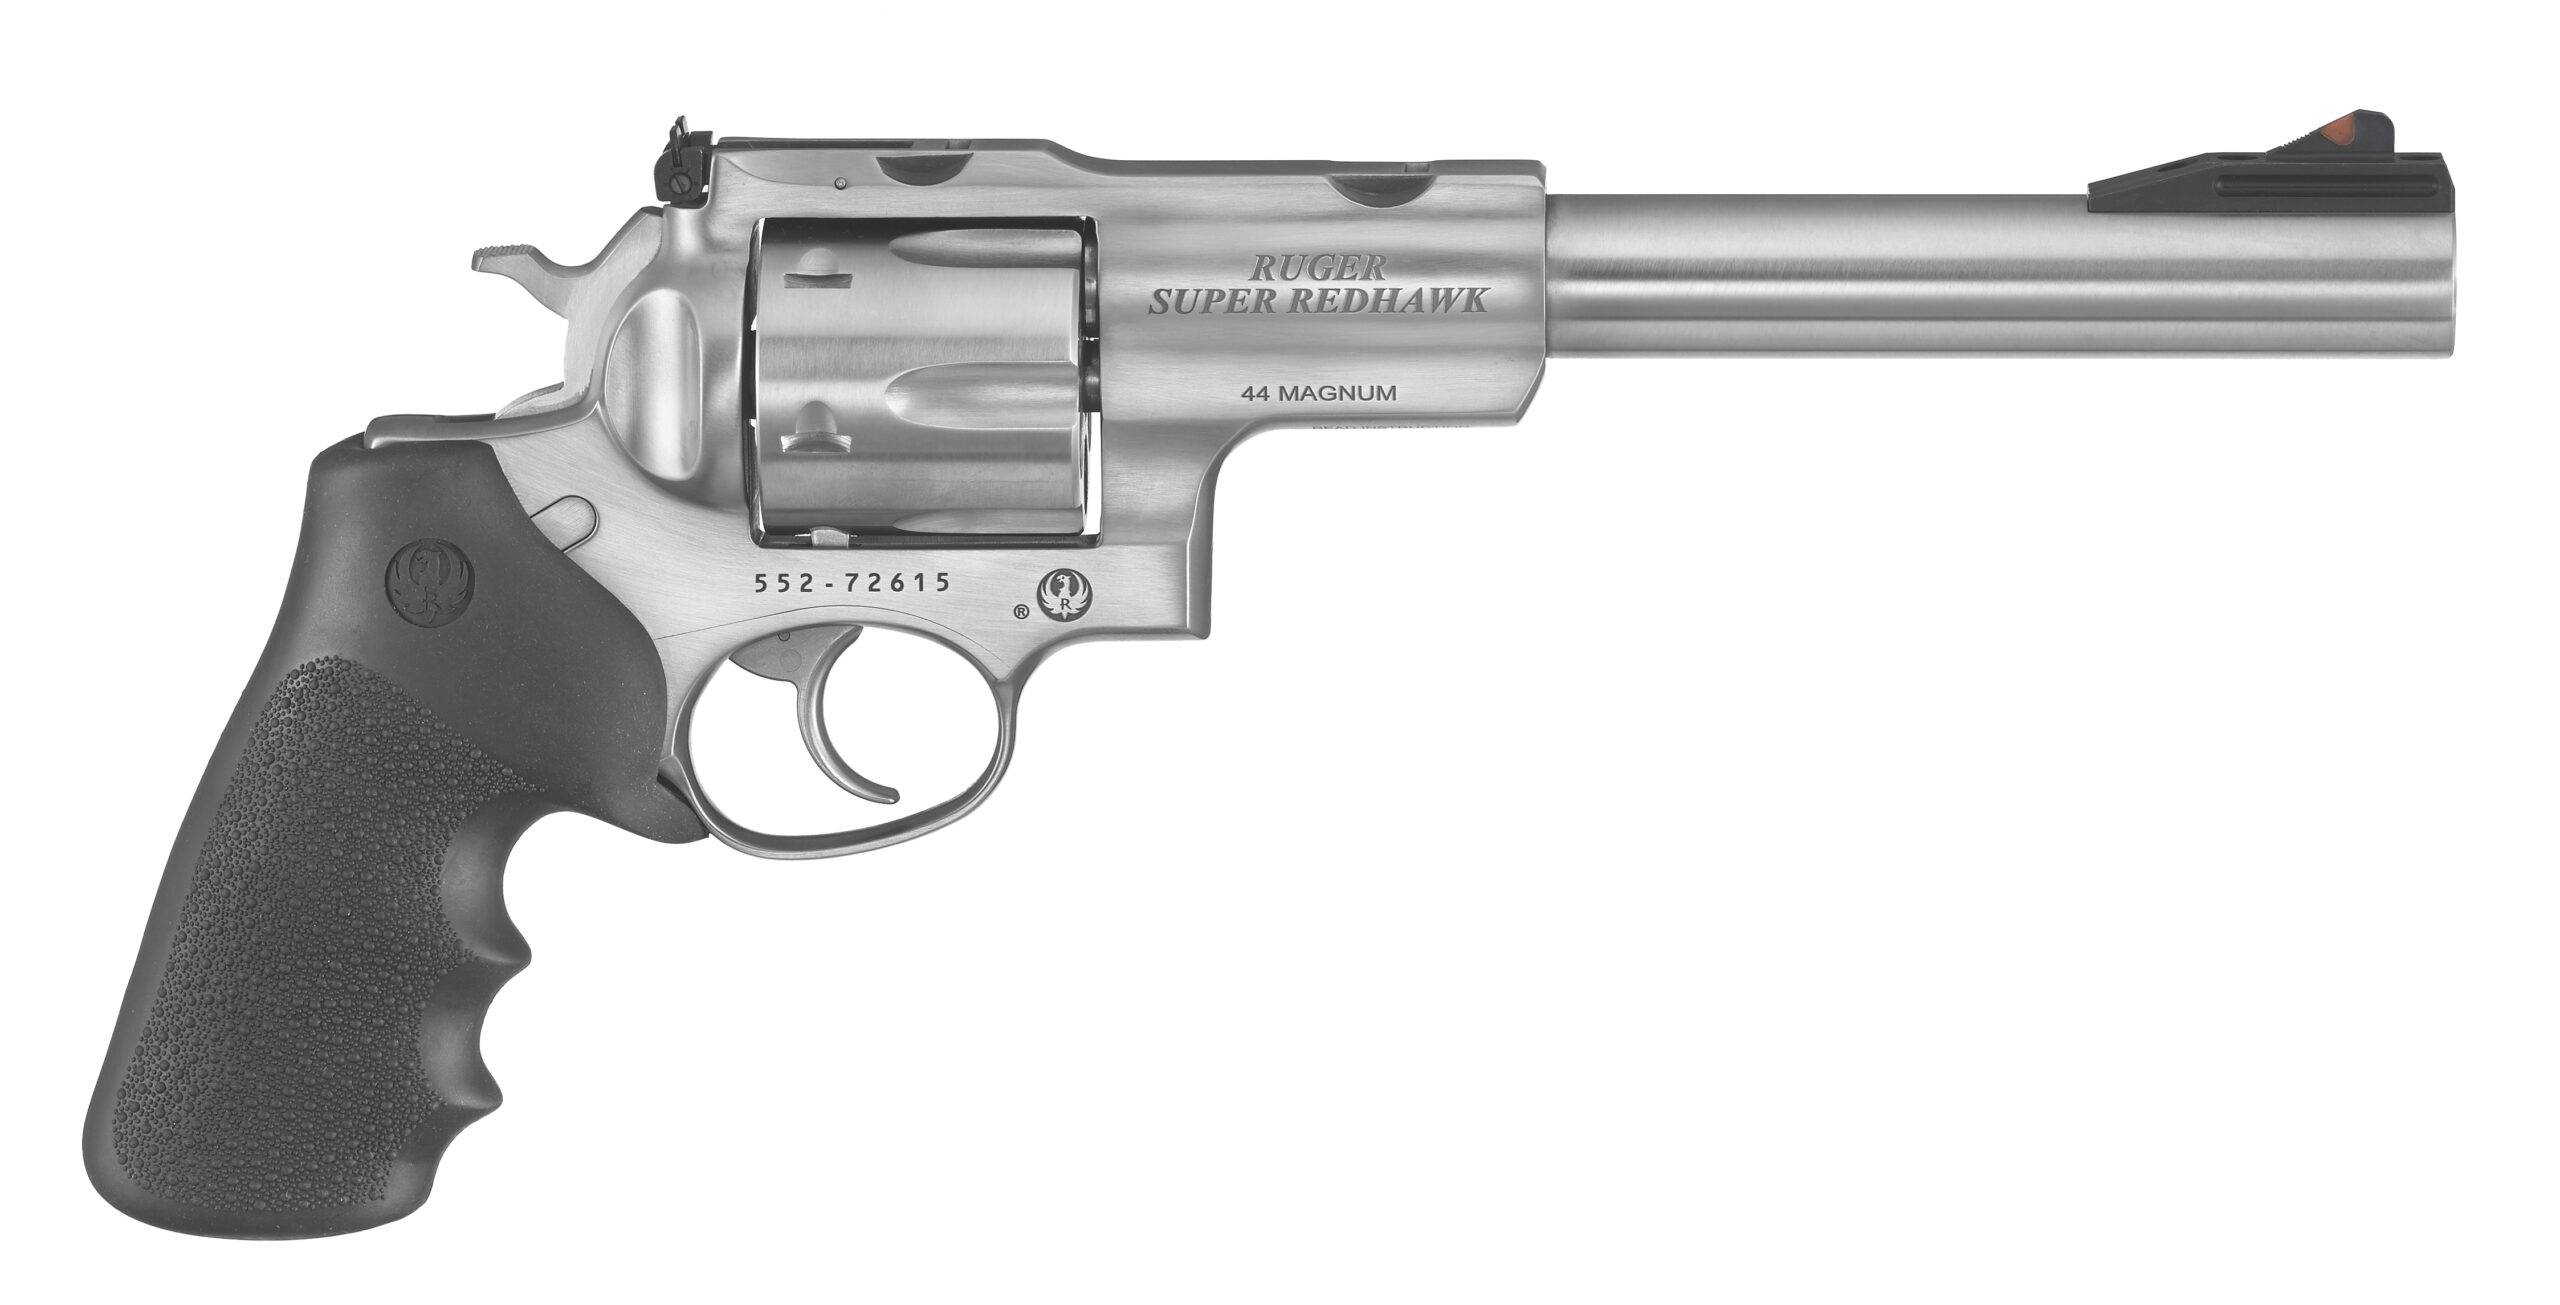 American-made, this revolver is for serious handgun hunters.